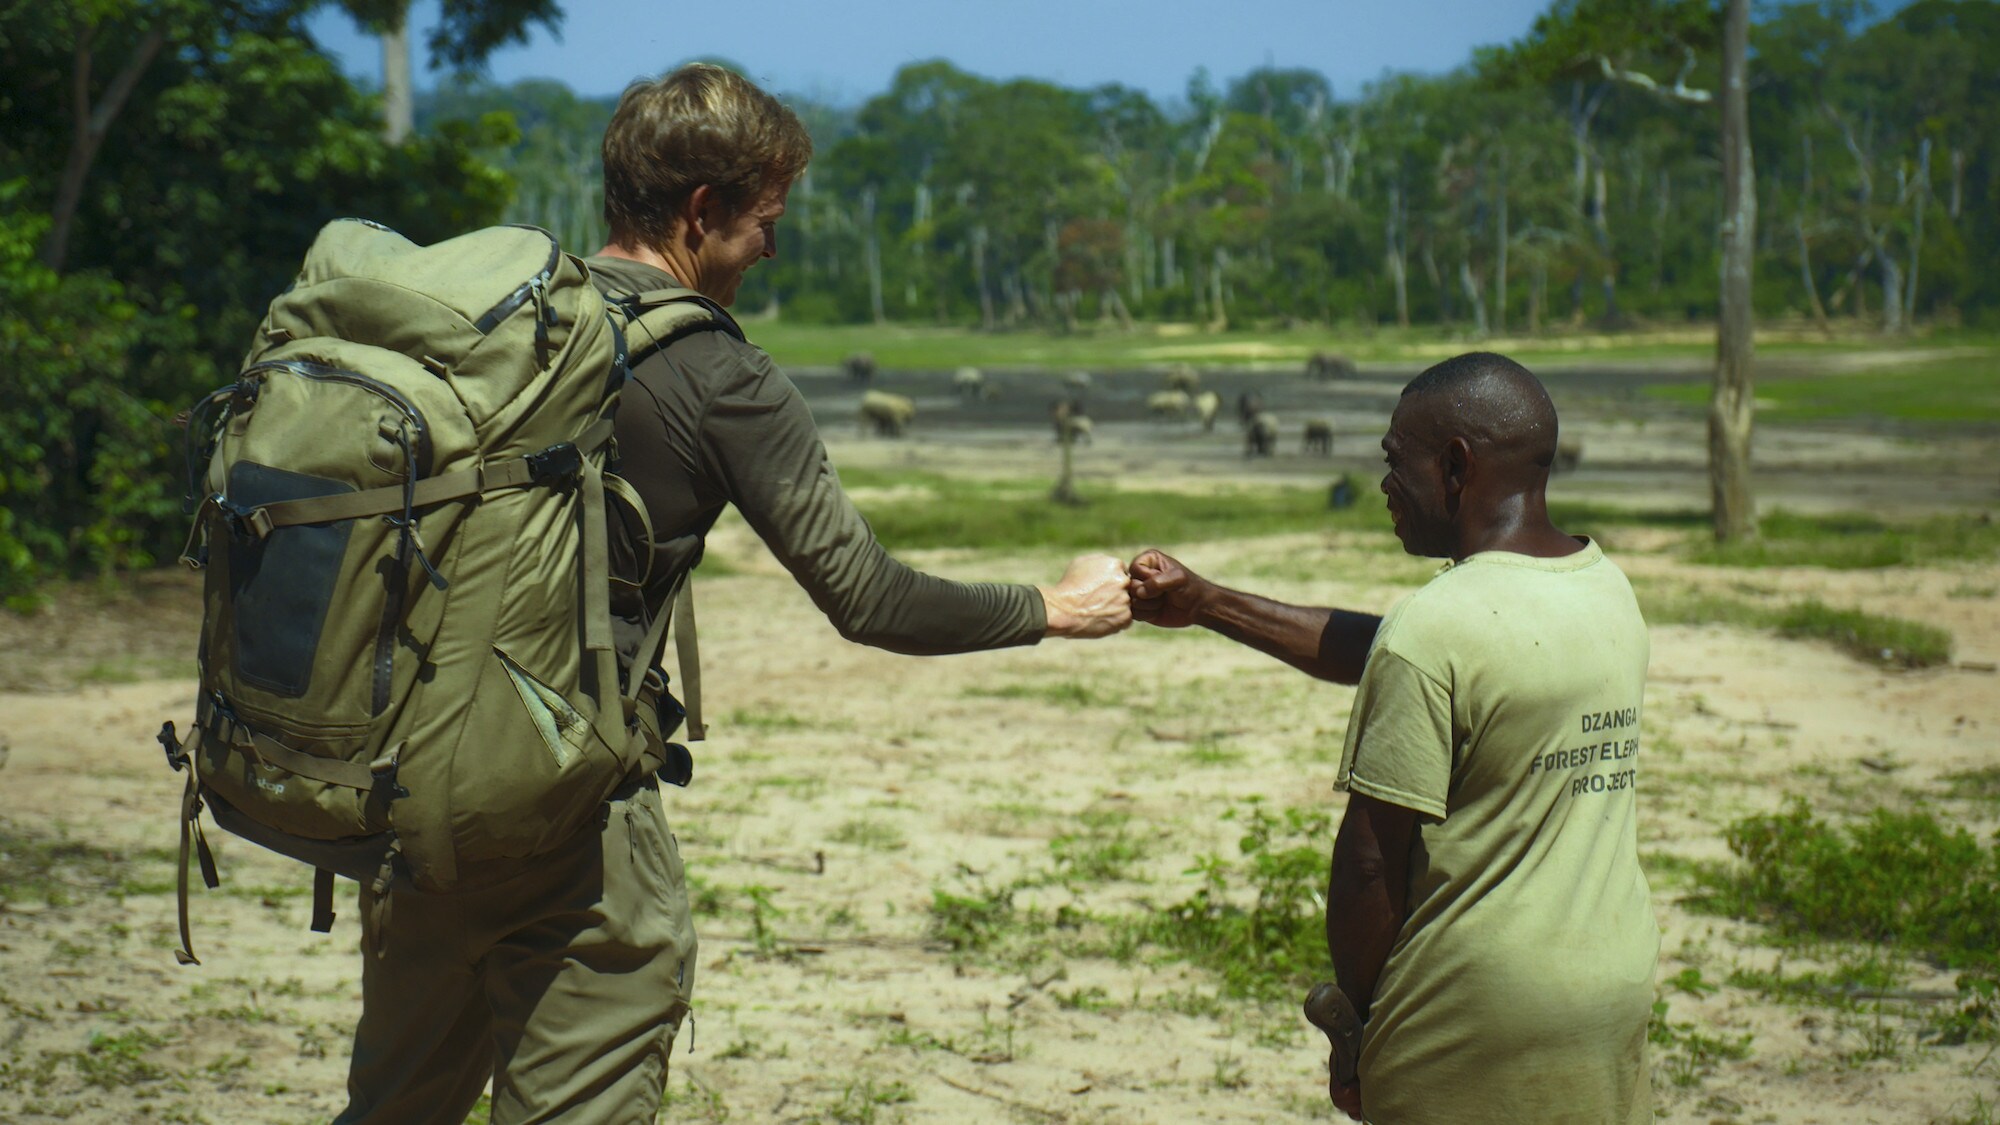 Bertie Gregory fist bumping Ngbanda Bathelomie. (National Geographic for Disney+/Mark Mclean)